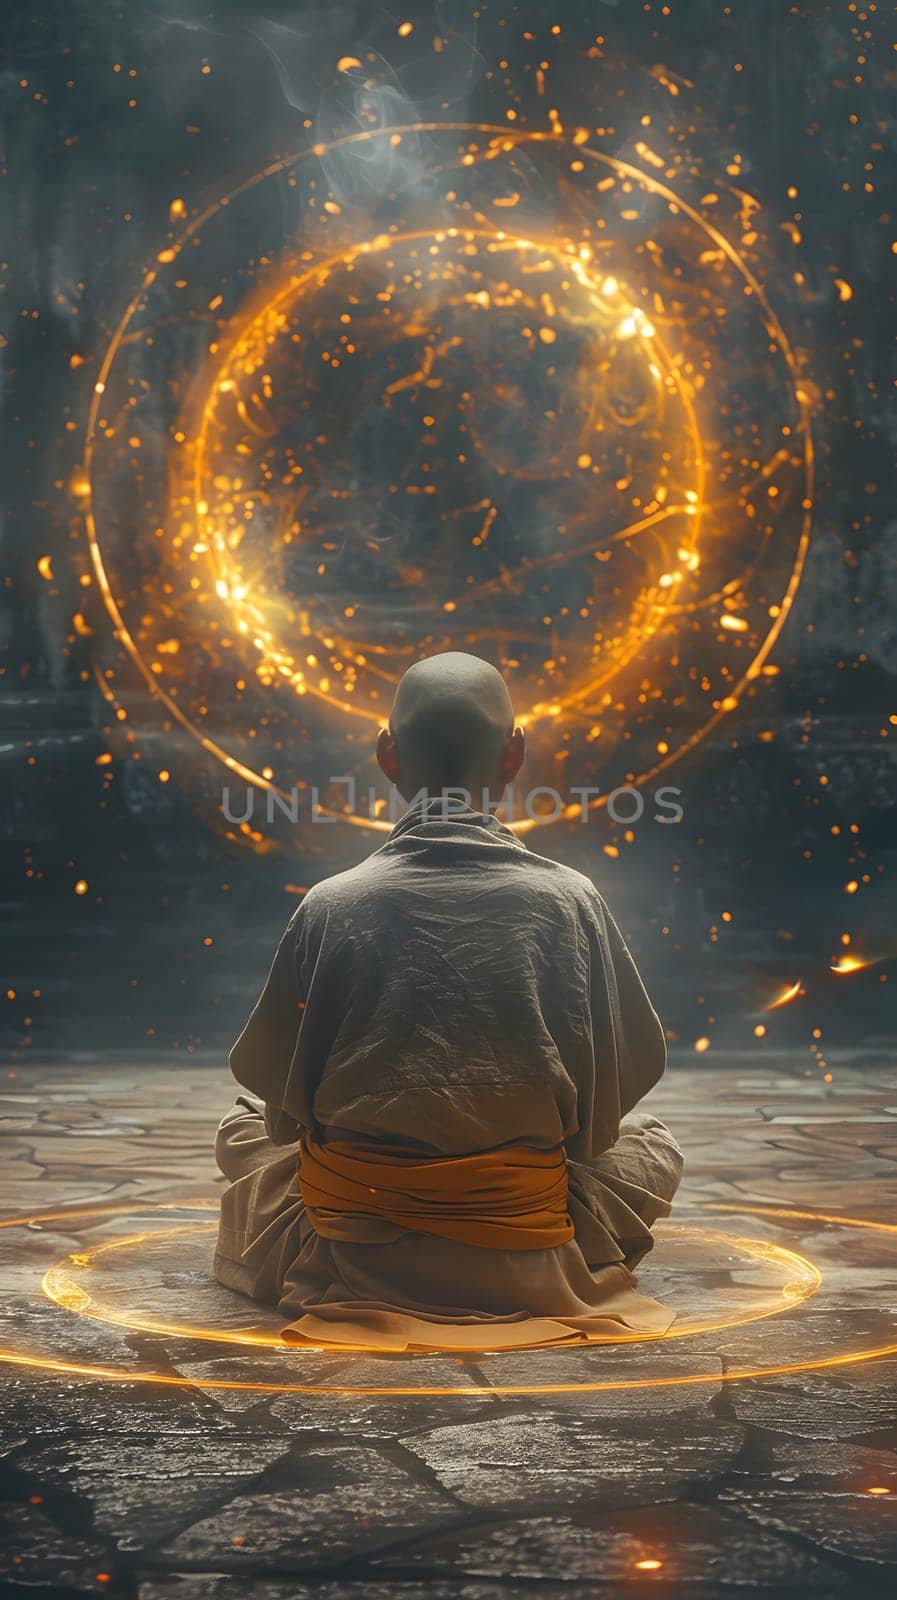 A man portrayed in CG artwork is meditating in a lotus position in front of a glowing circle, creating a mystical and surreal image blending art and spirituality